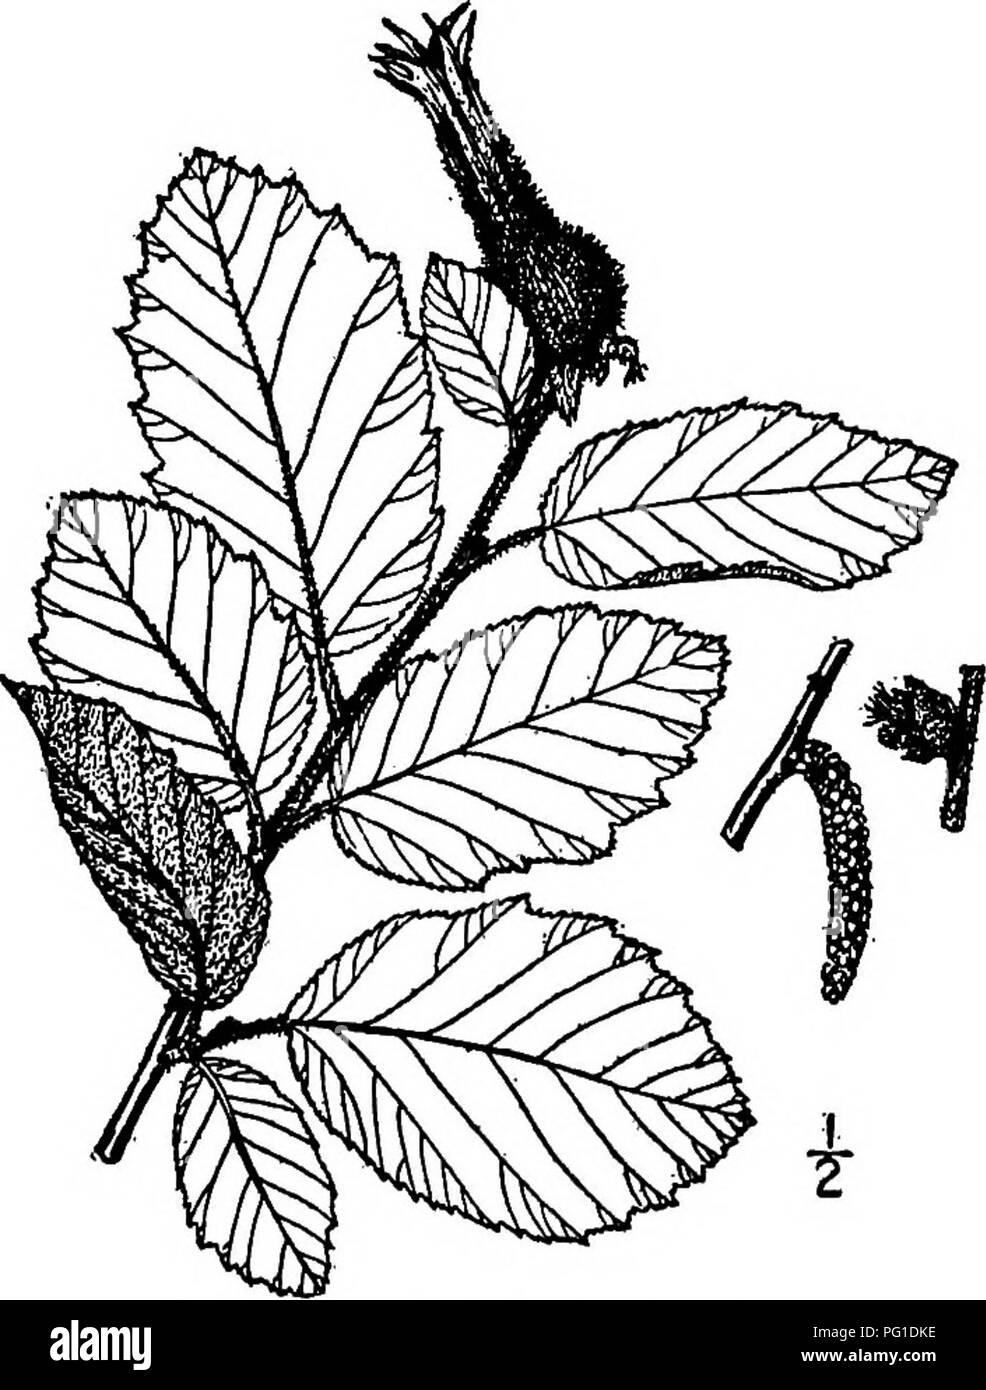 . North American trees : being descriptions and illustrations of the trees growing independently of cultivation in North America, north of Mexico and the West Indies . Trees. California Hazelnut 245 III. CAtlFORNIA HAZELNUT GENUS CORYLUS [TOURNEFORT] LINN^US Species Coiylus californica (A. de Candolle) Rose Corylus rostrata var. californica A. de Candolle HIS is an under shrub or small tree of wooded hillsides, from middle California northward through Oregon to Washington, attaining a height of 12 meters, with a trunk diameter of 2.5 dm. The twigs are slender and round, with long, often glandu Stock Photo